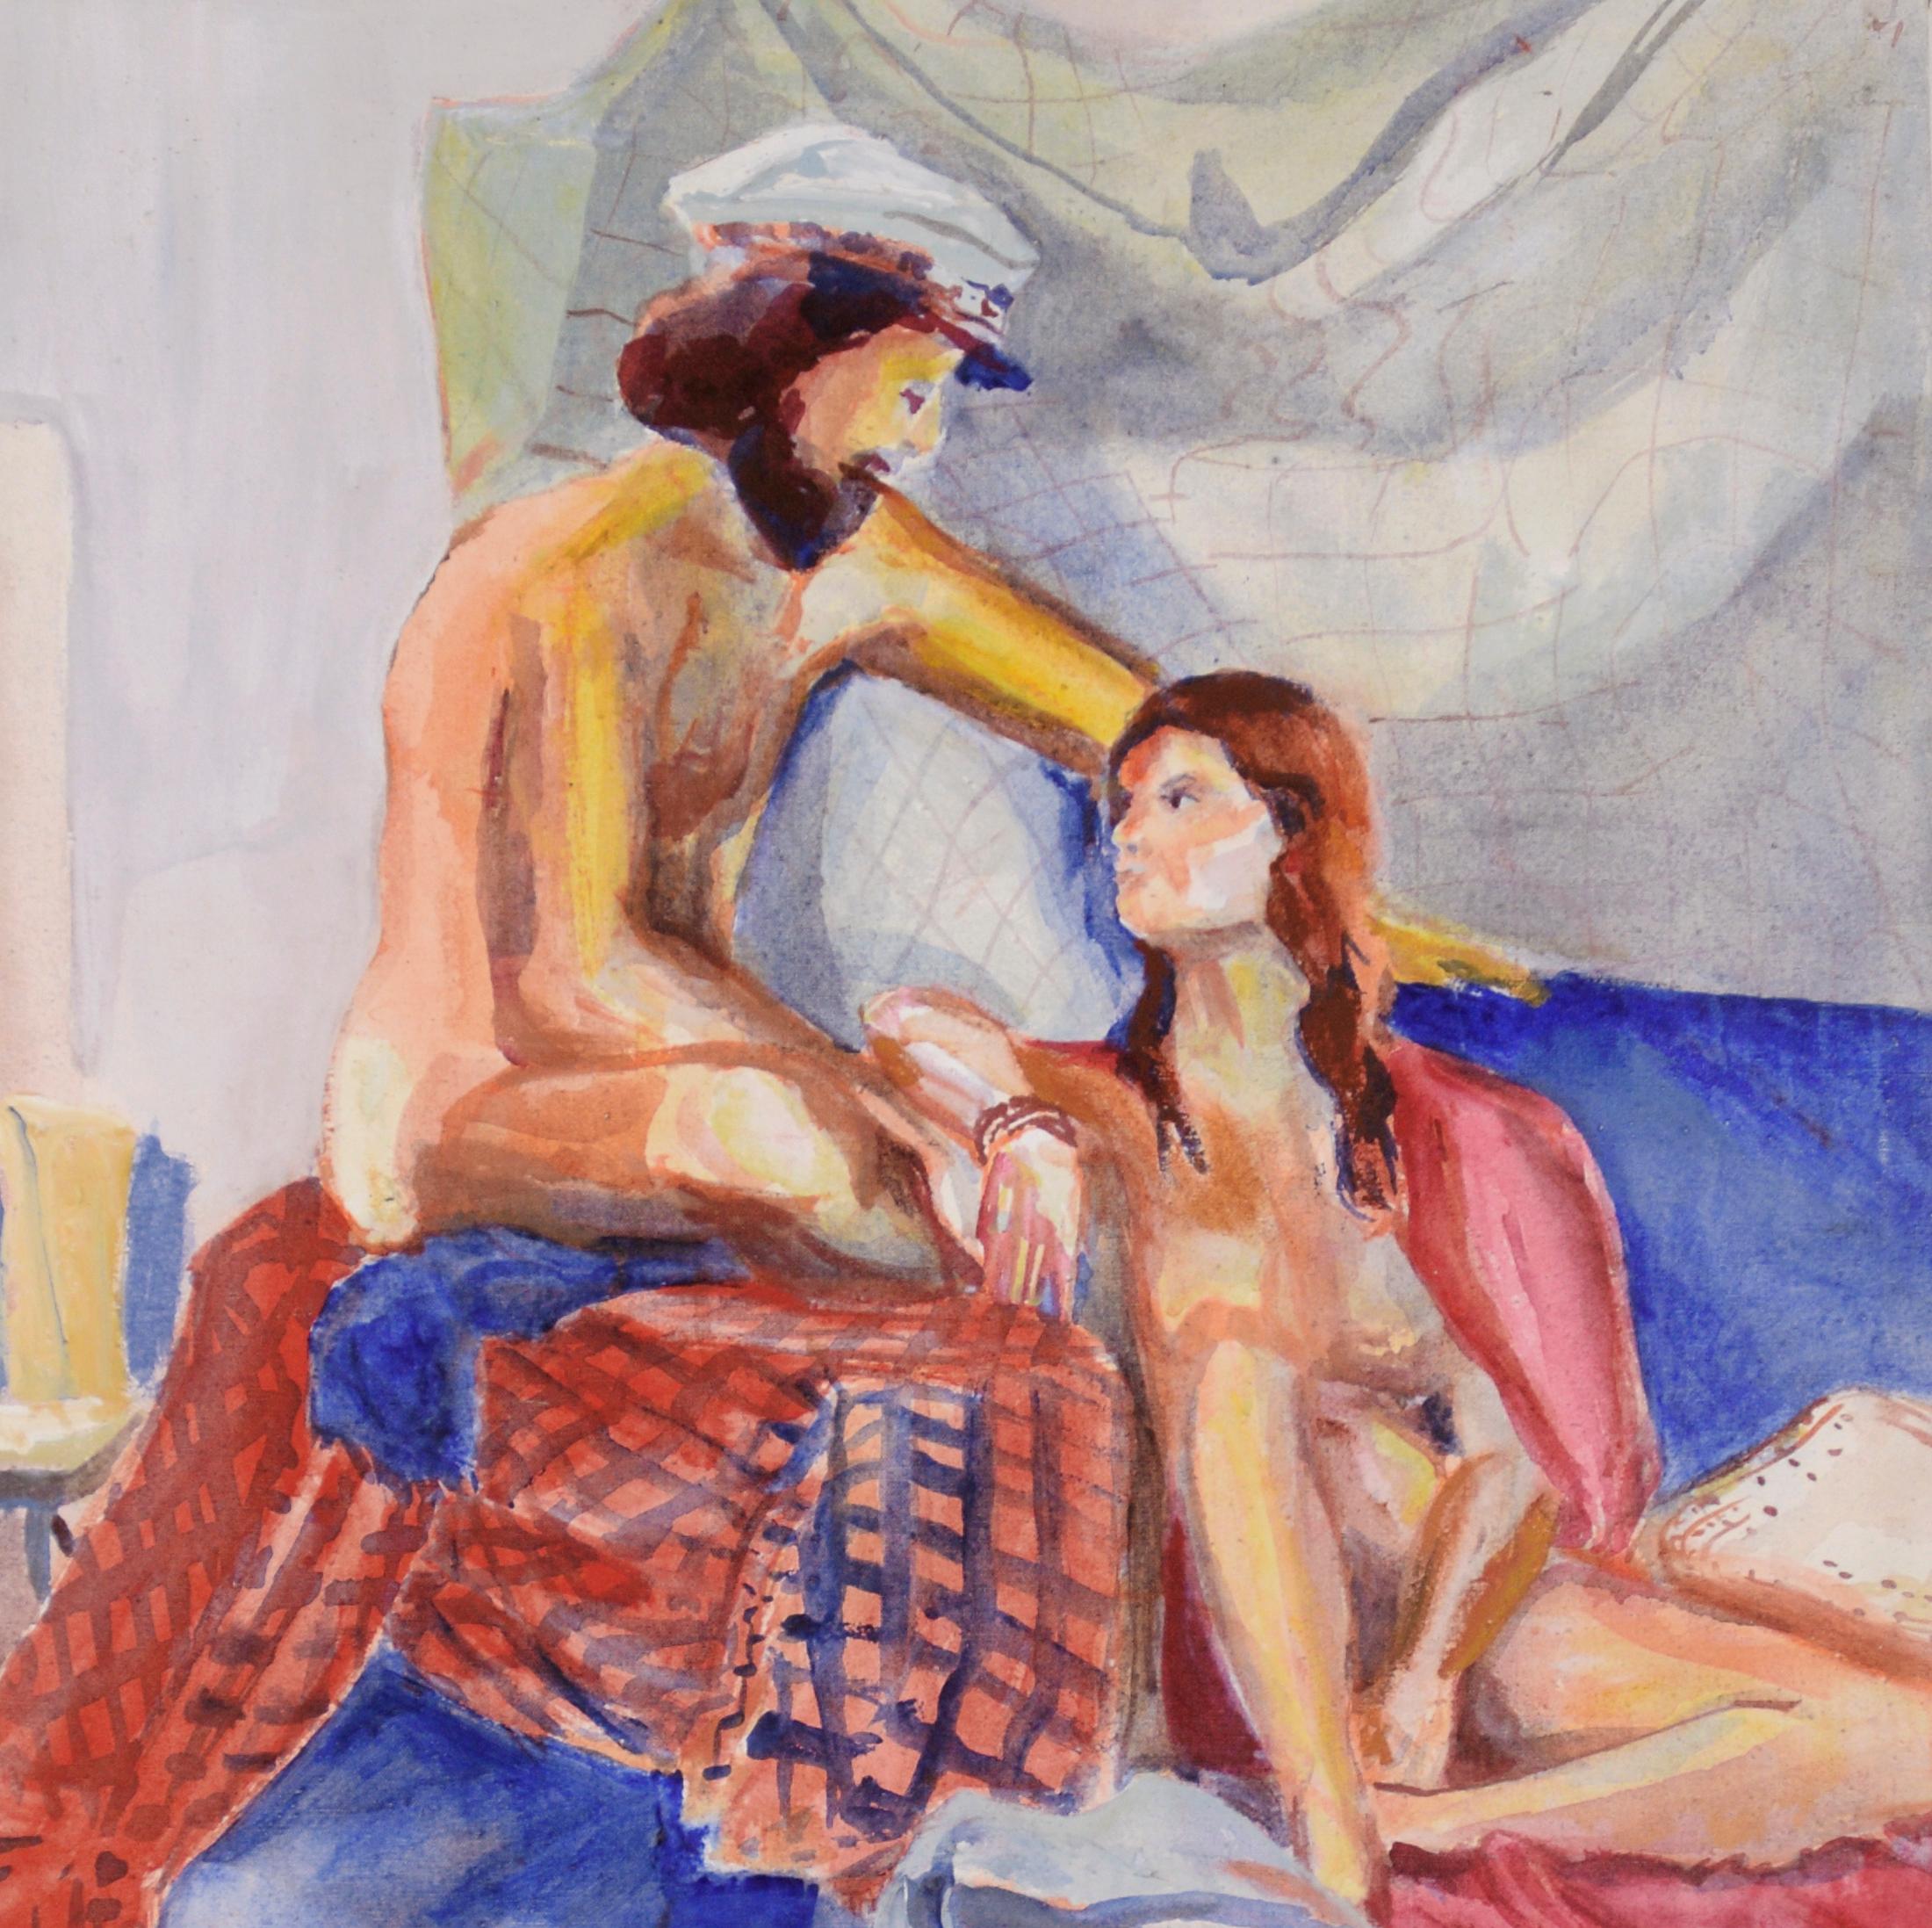 A Muse - Figurative Study in Oil on Canvas

A nude man wearing a sailor hat while he looks down at a woman sitting on sheets of red and blue by American painter, Patricia Gren Hayes (b. 1932). The man is wearing a captain's hat, looking down at the